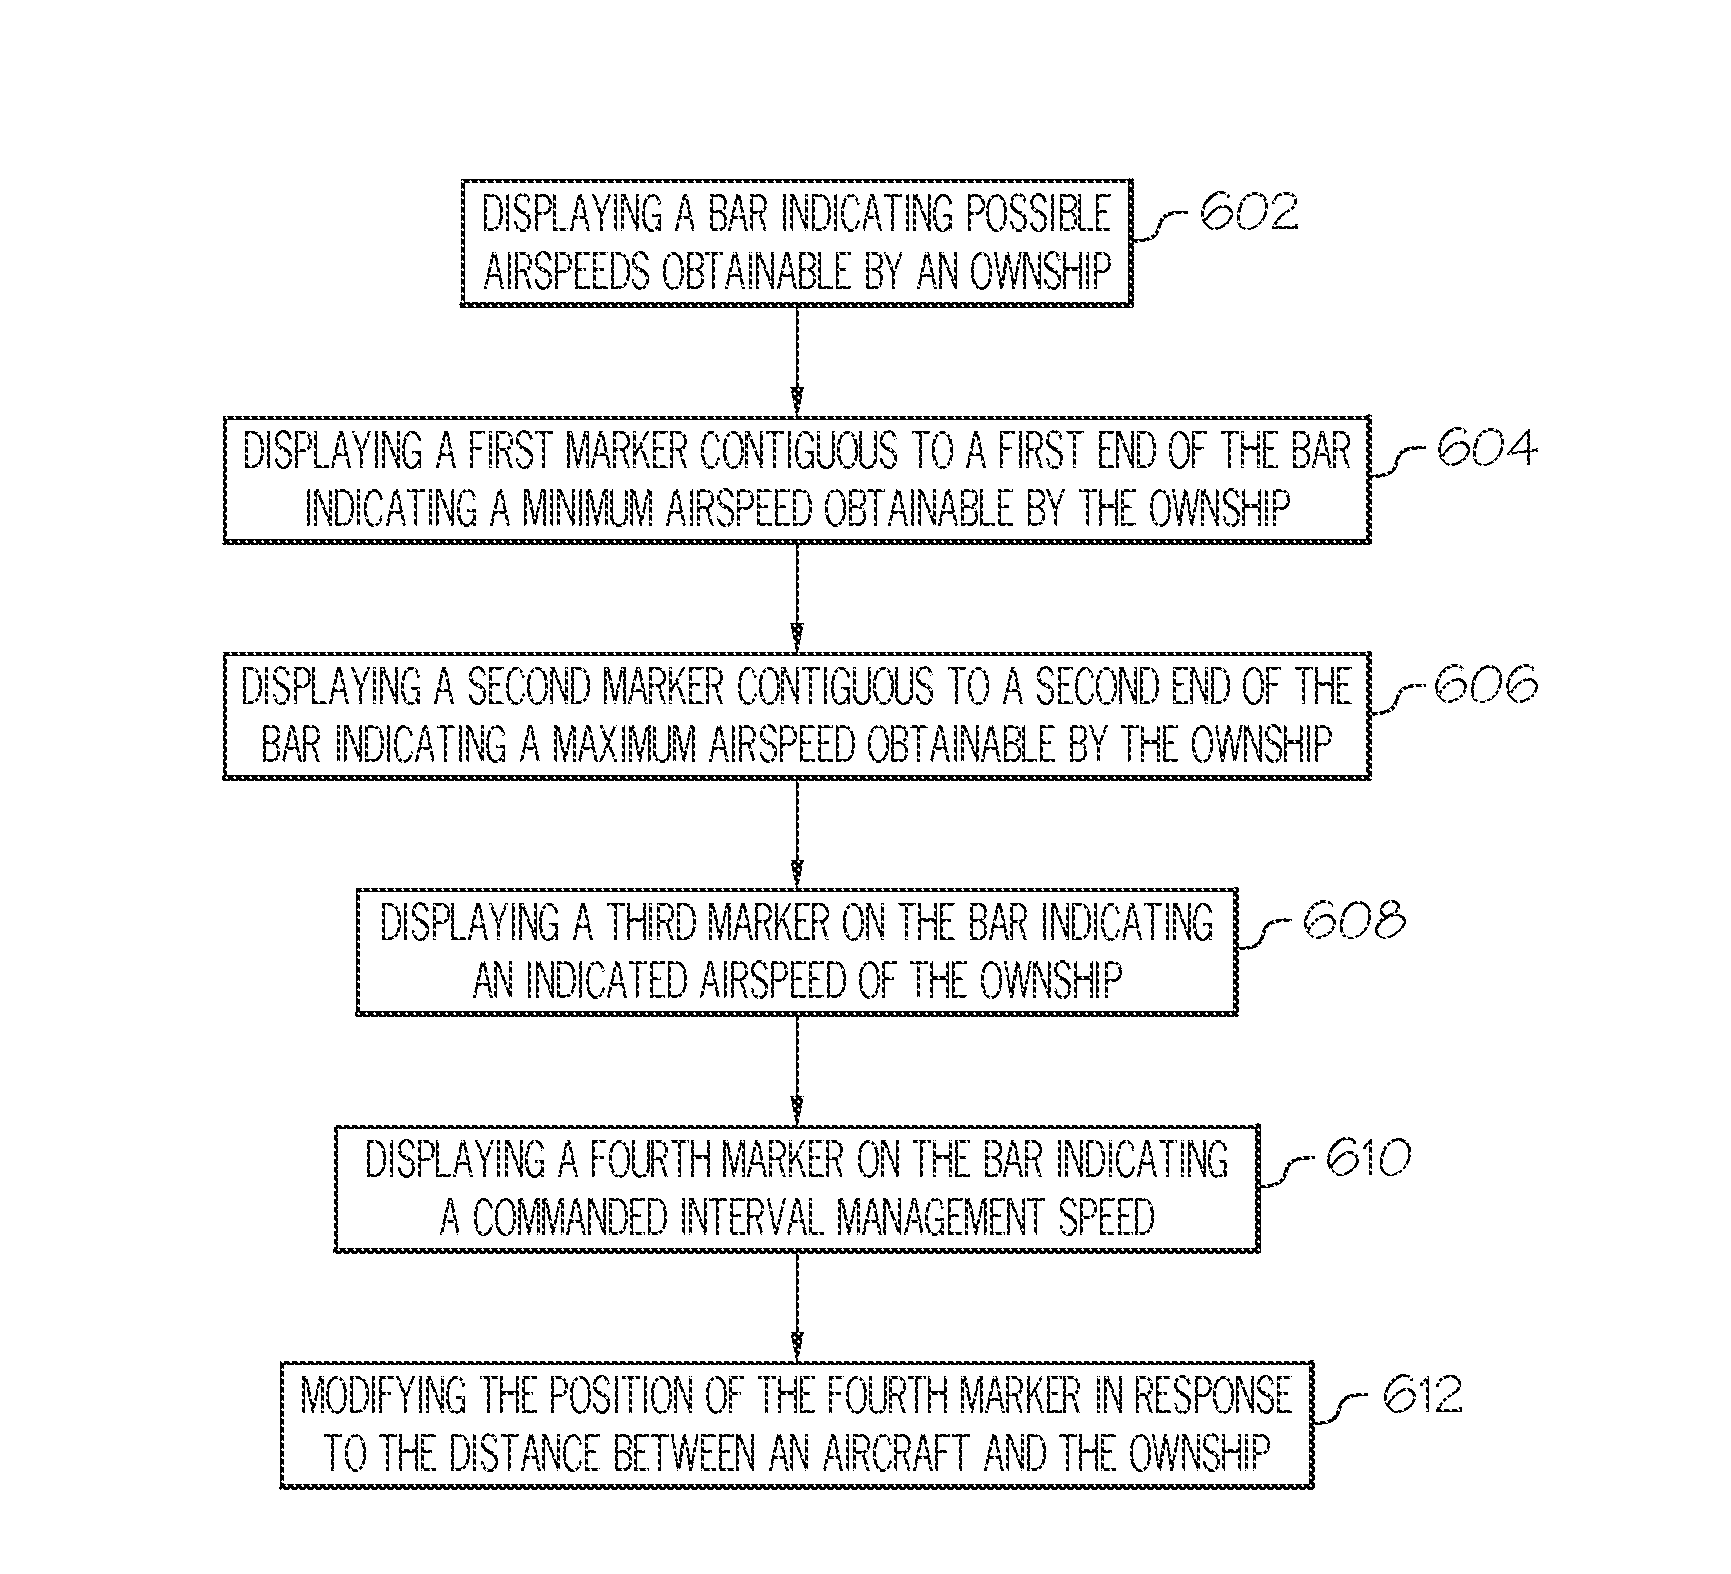 System and method for managing an interval between aircraft